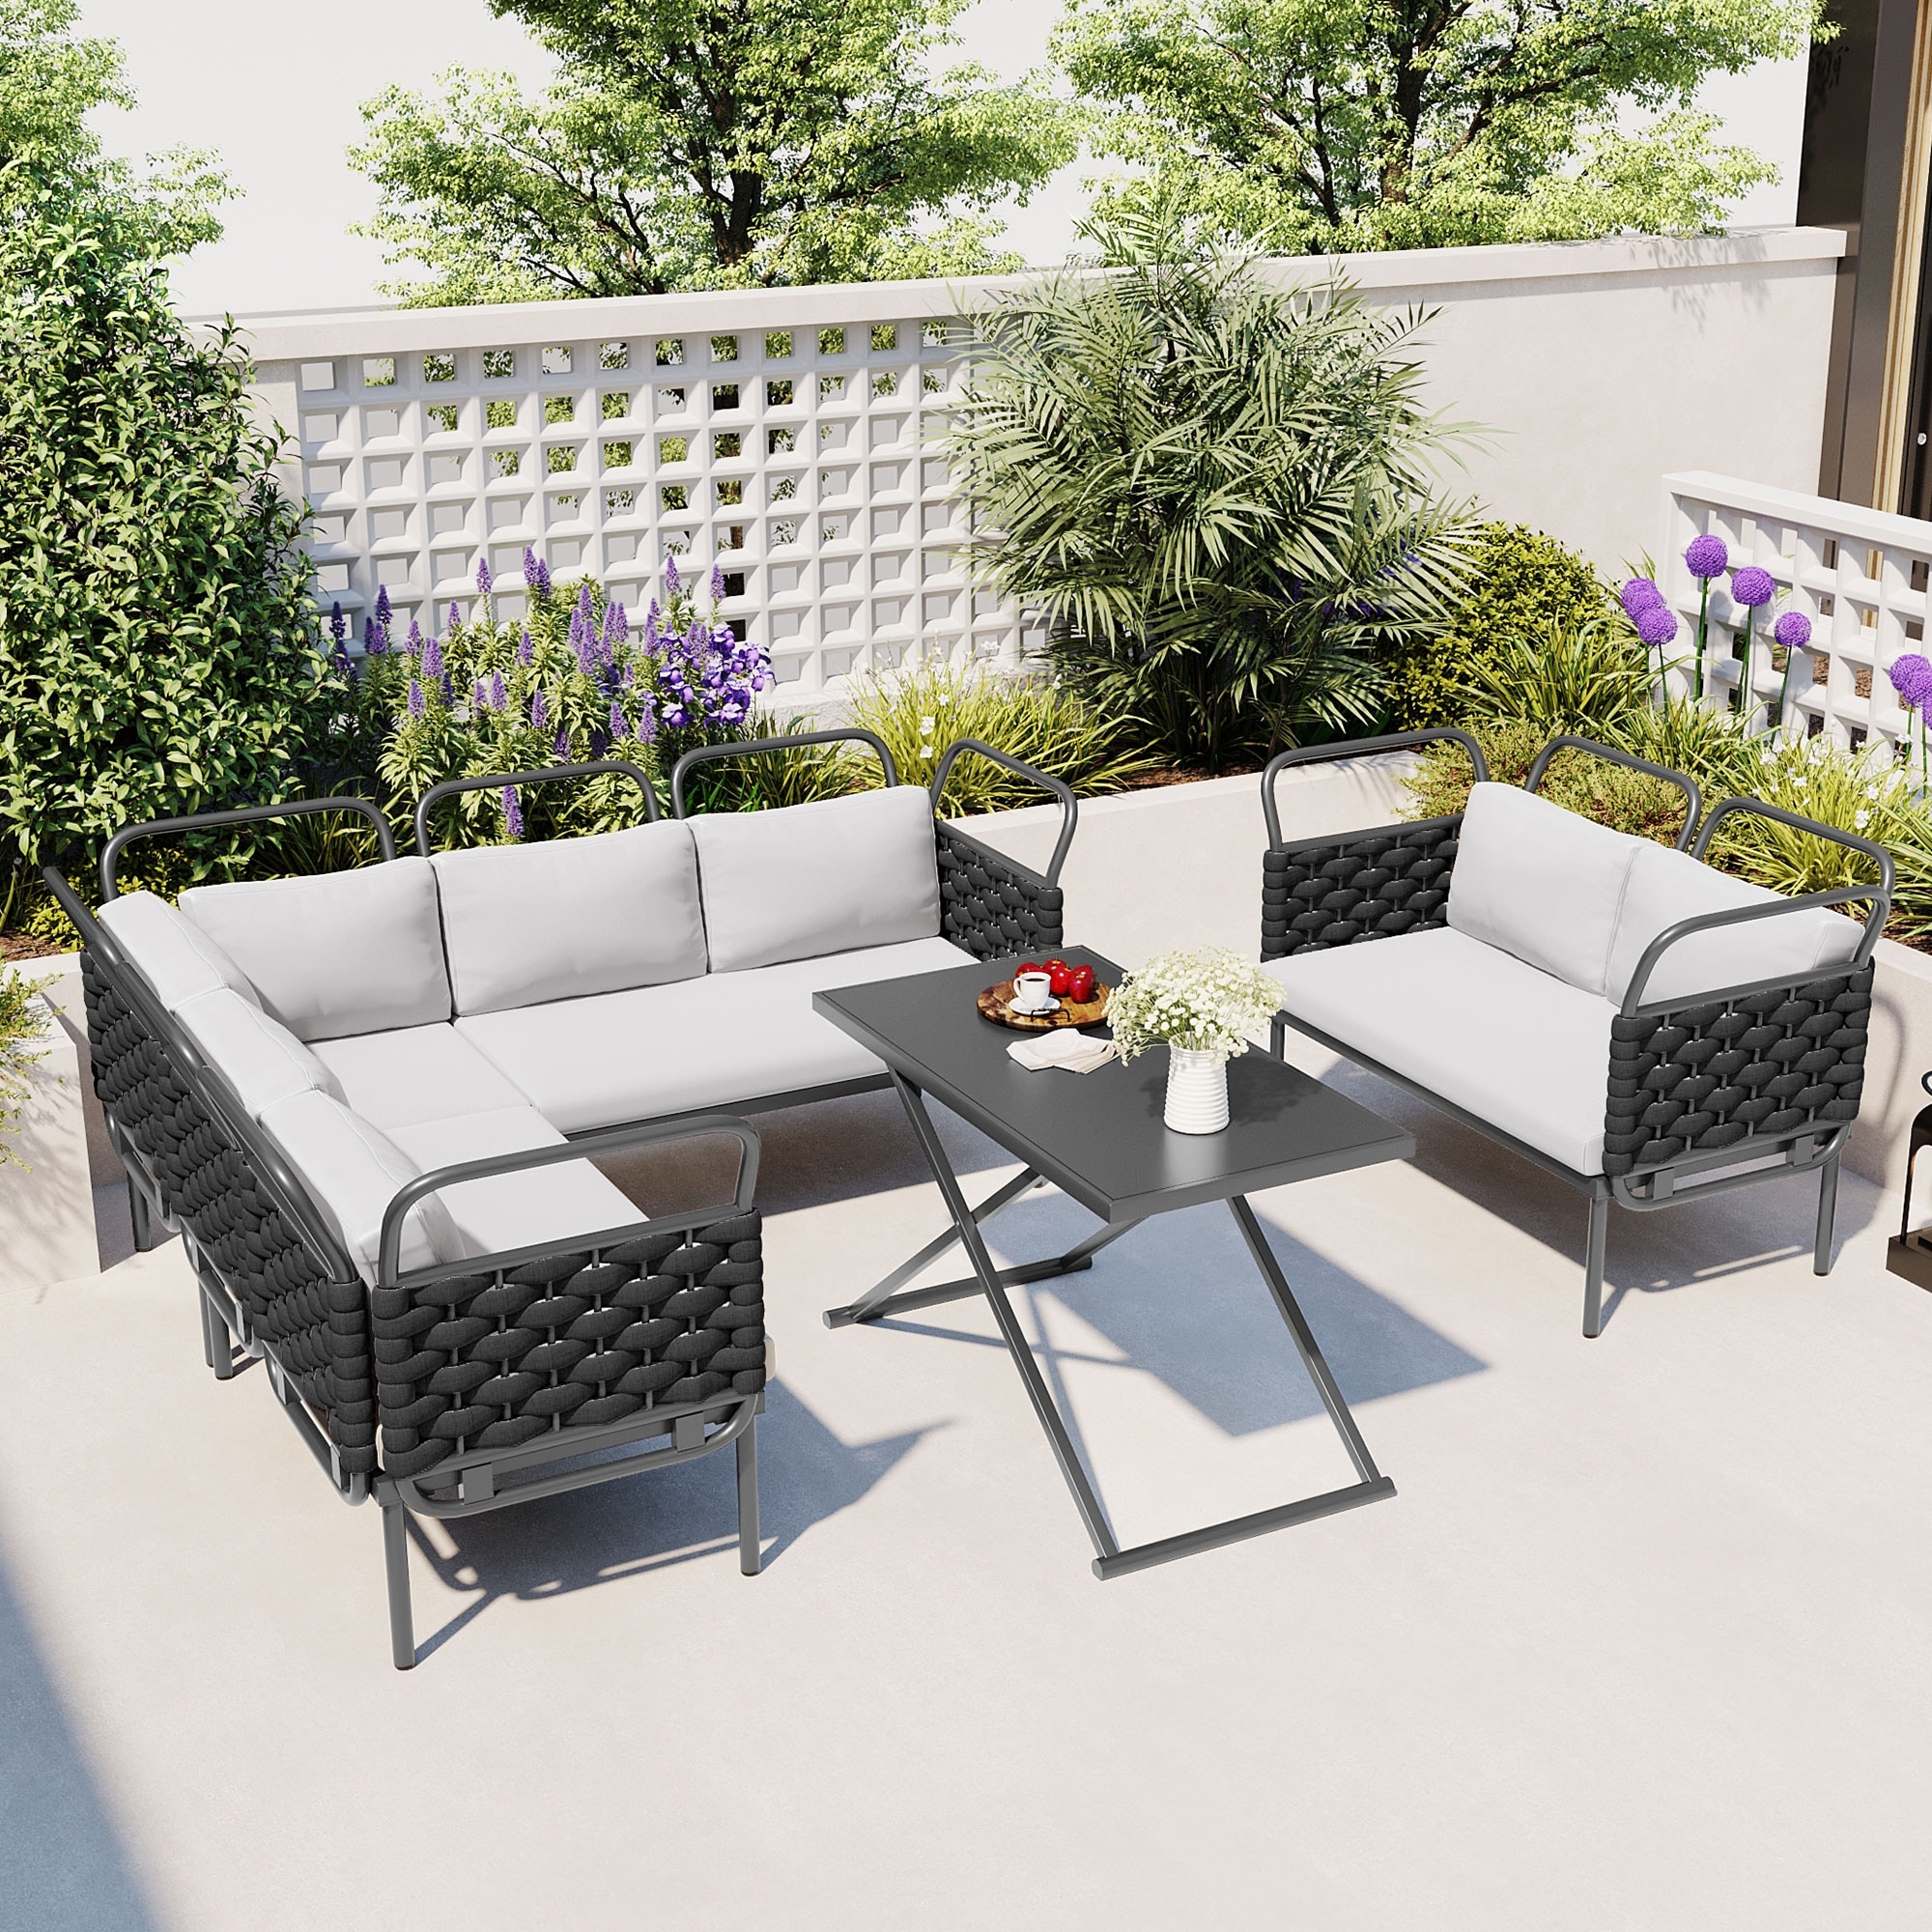 Outdoor Woven Rope Furniture Set, 5-Piece Modern Patio Sectional Sofa Set with Glass Table & Cushions - Grey+Black